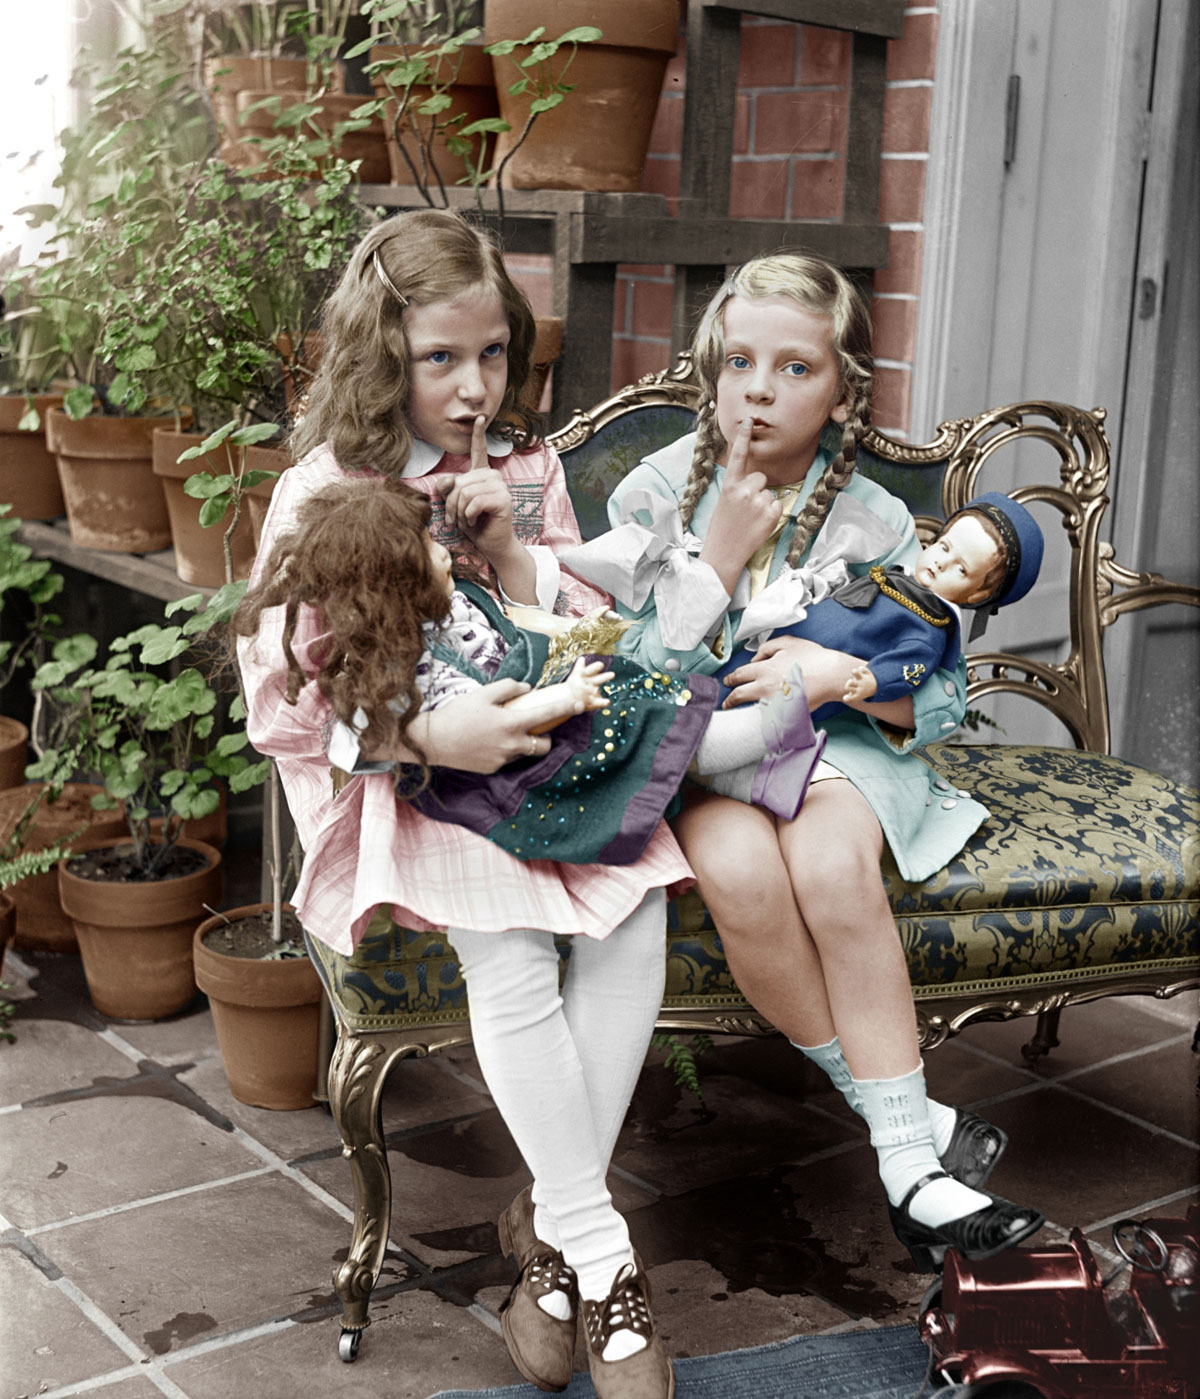 Two Young Girls With Dolls (between 1909 and 1923) National Photo Company, Library of Congress. View full size.